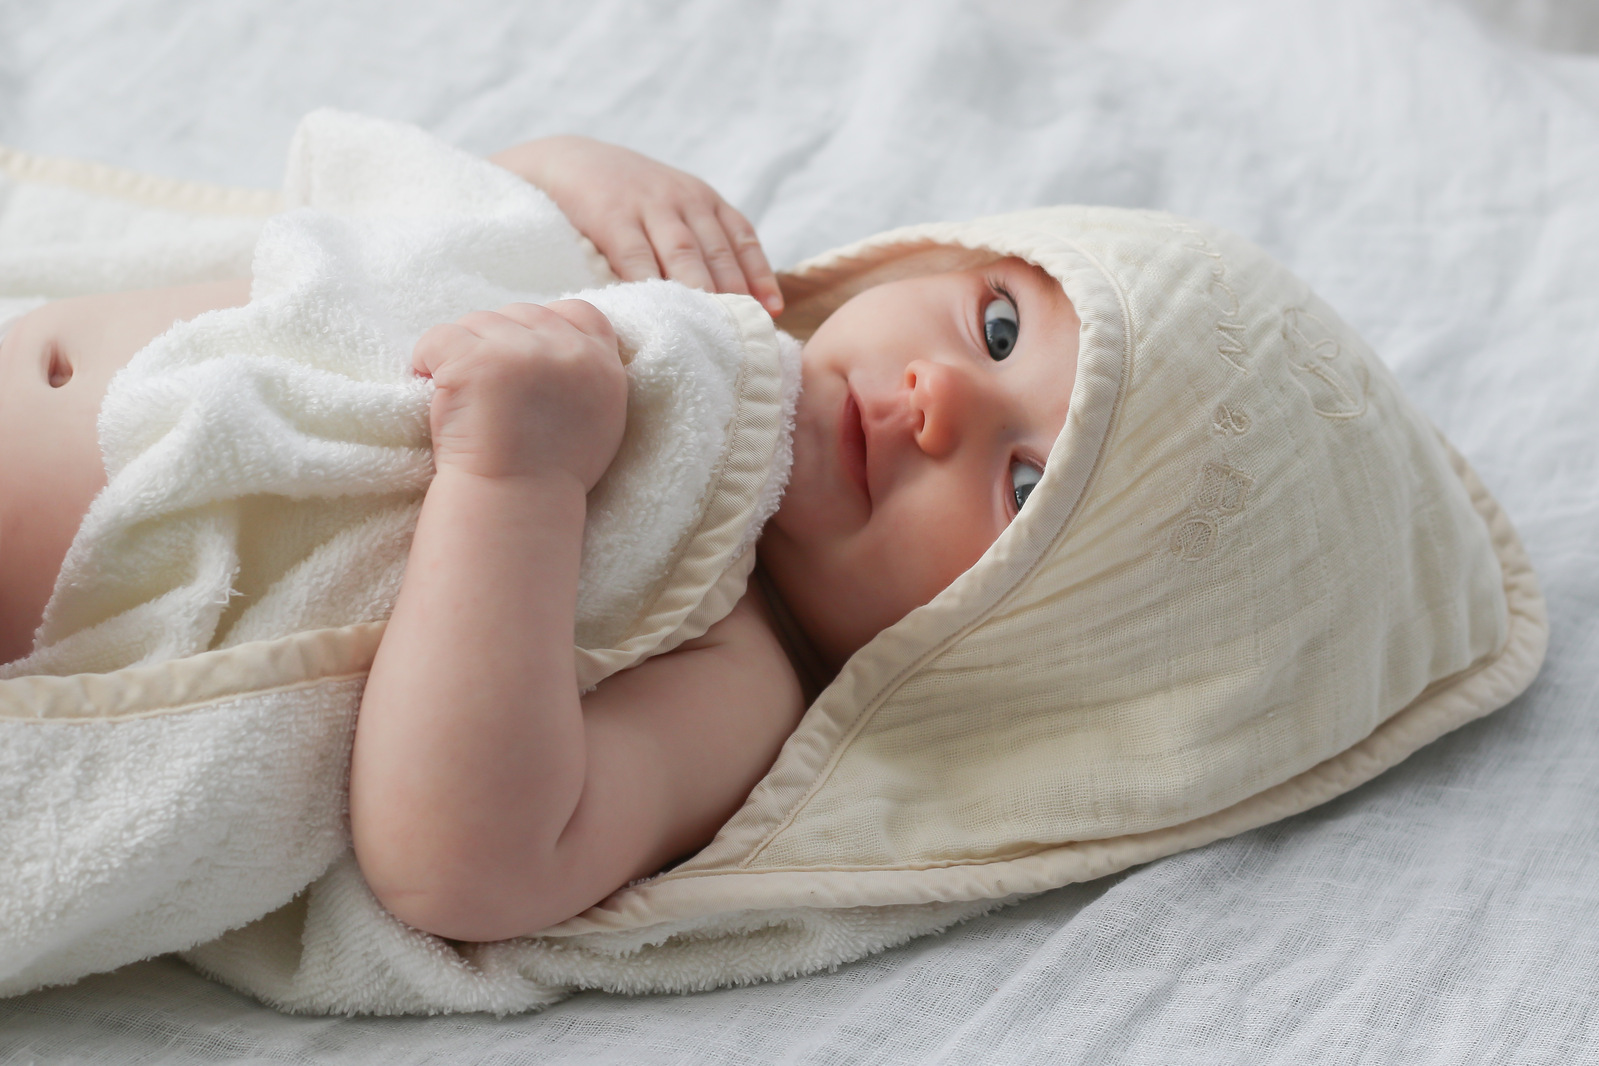 Bamboo Bliss for Babies Why Bamboo Diapers and Hooded Towels Are the 2023 Parenting Trends